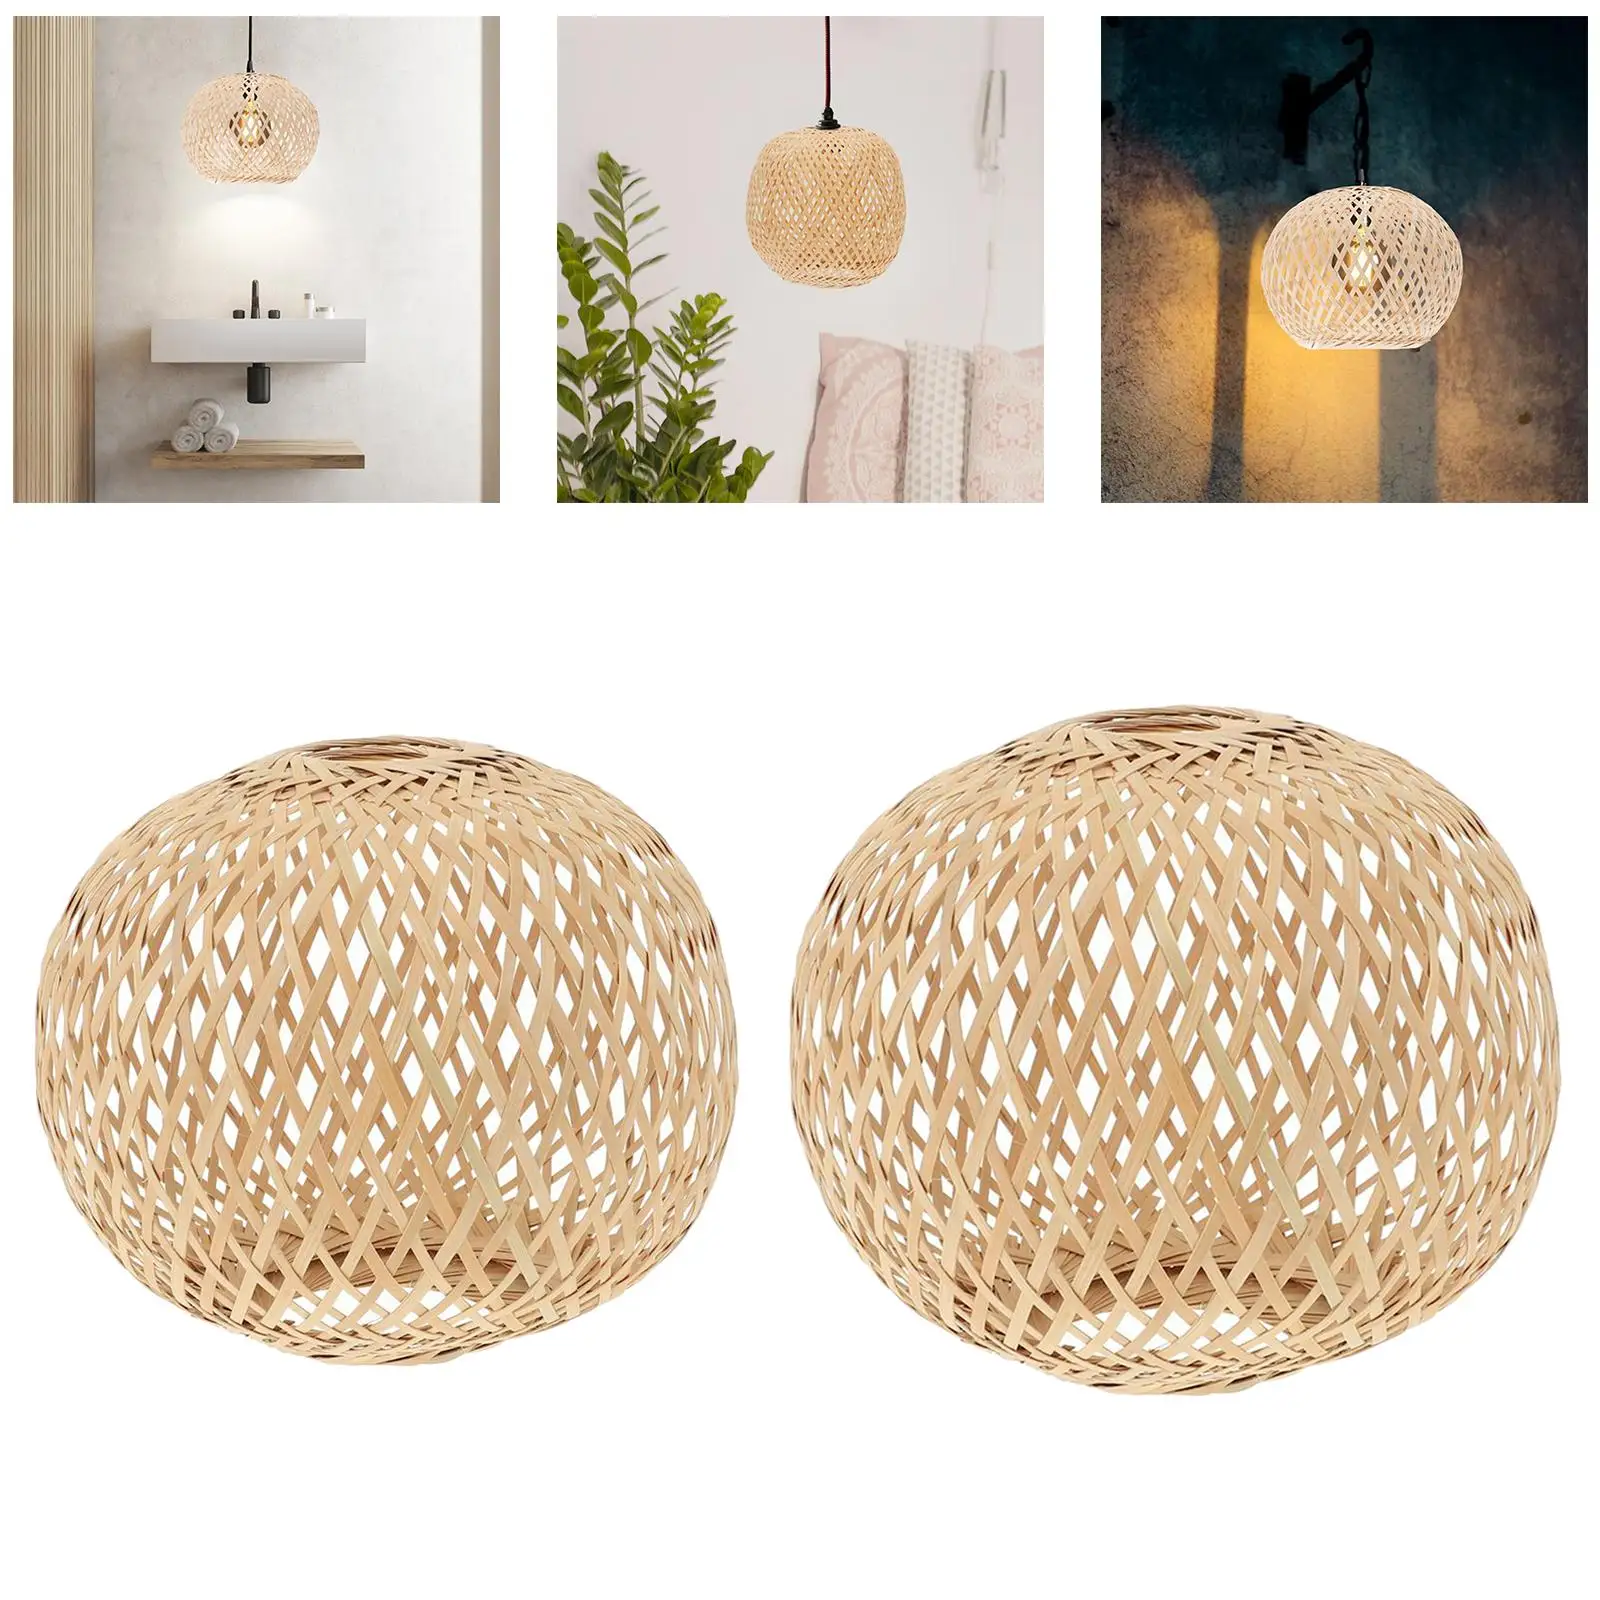 Bamboo Woven Lampshade Pendant Light Shade Handwoven Hanging Light Fixture Chandelier Cover for Living Room Kitchen Island Cafe